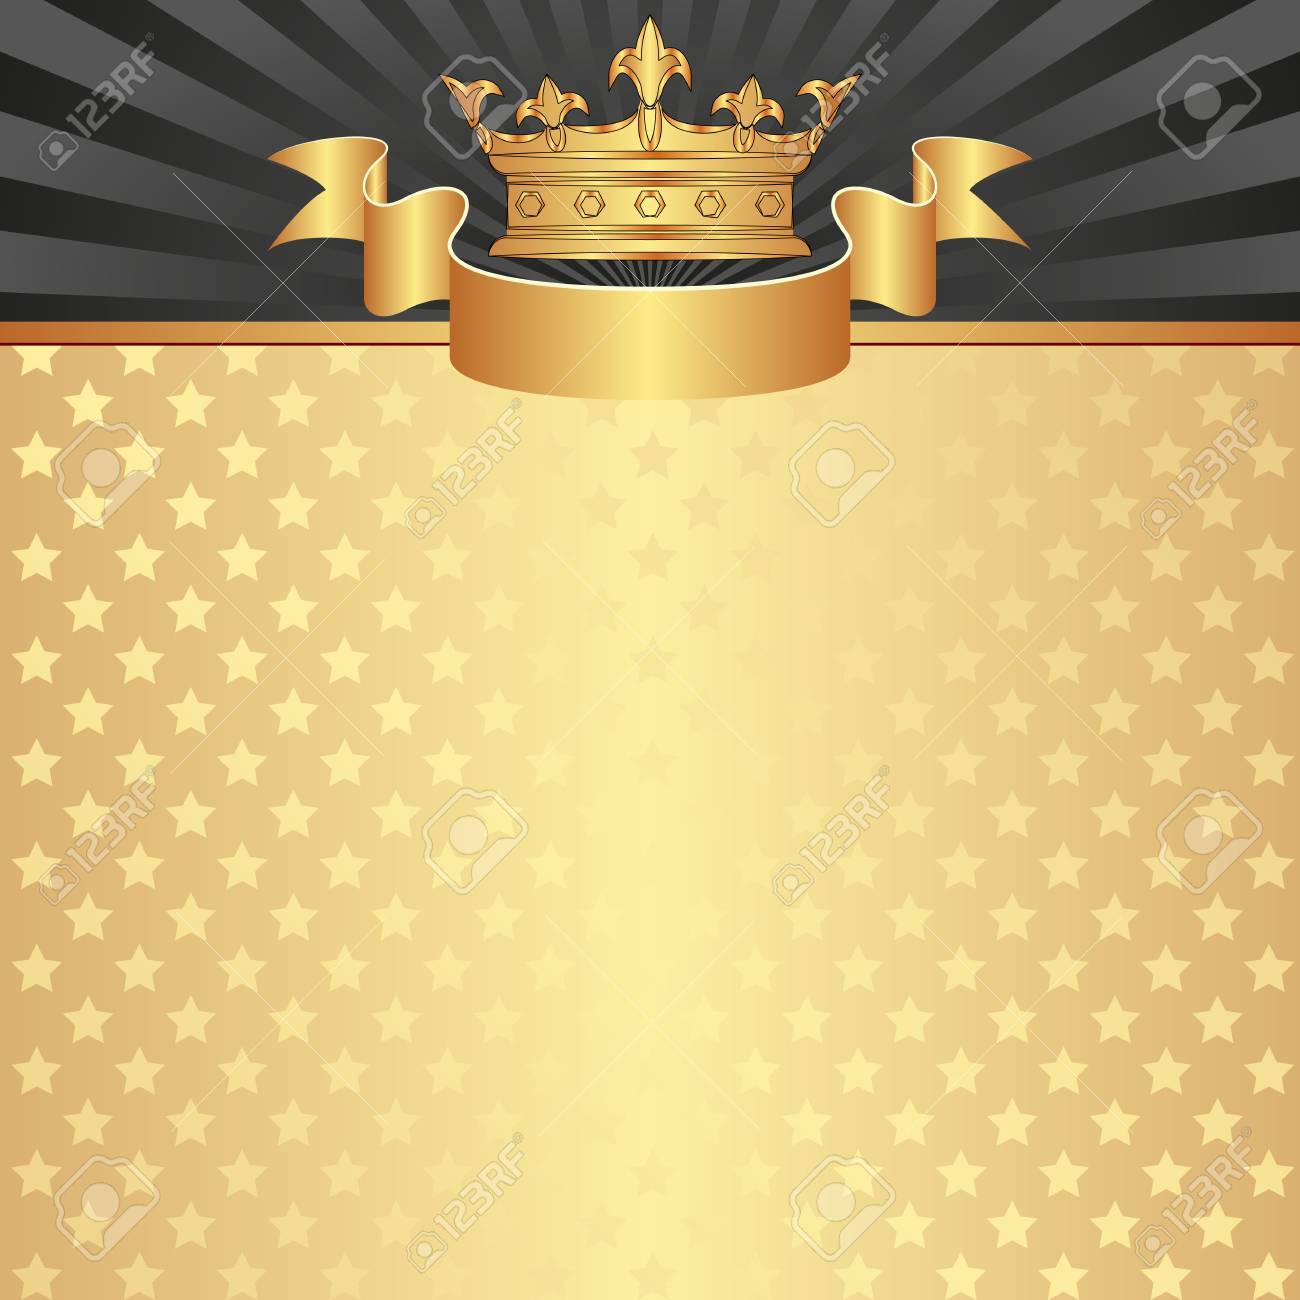 Royal Background With Crown Royalty Cliparts Vectors And